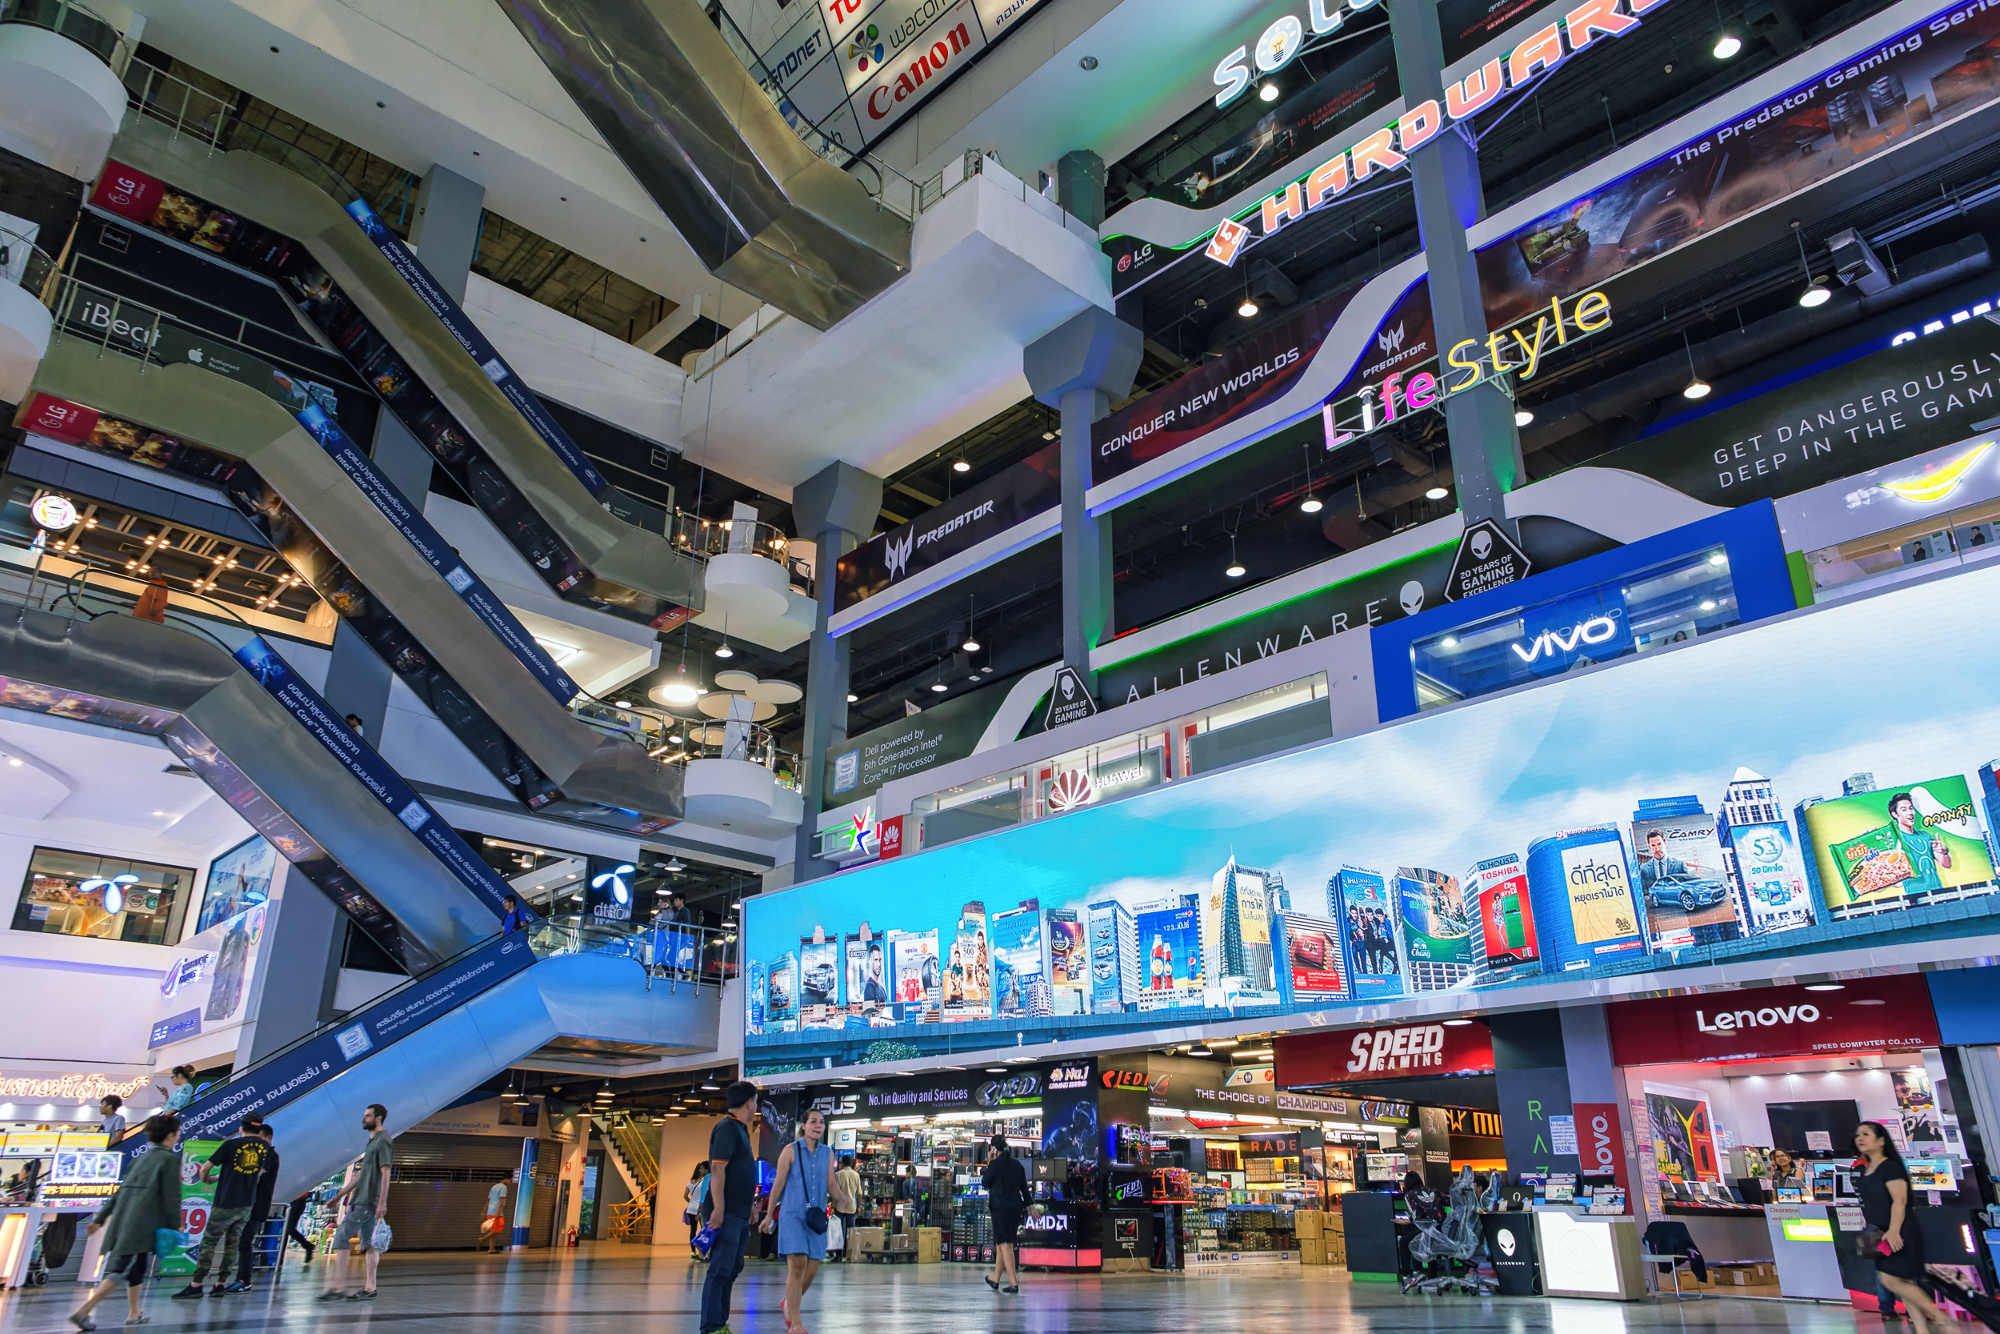 Pantip Plaza Bangkok - One of the Best Electronics Malls in